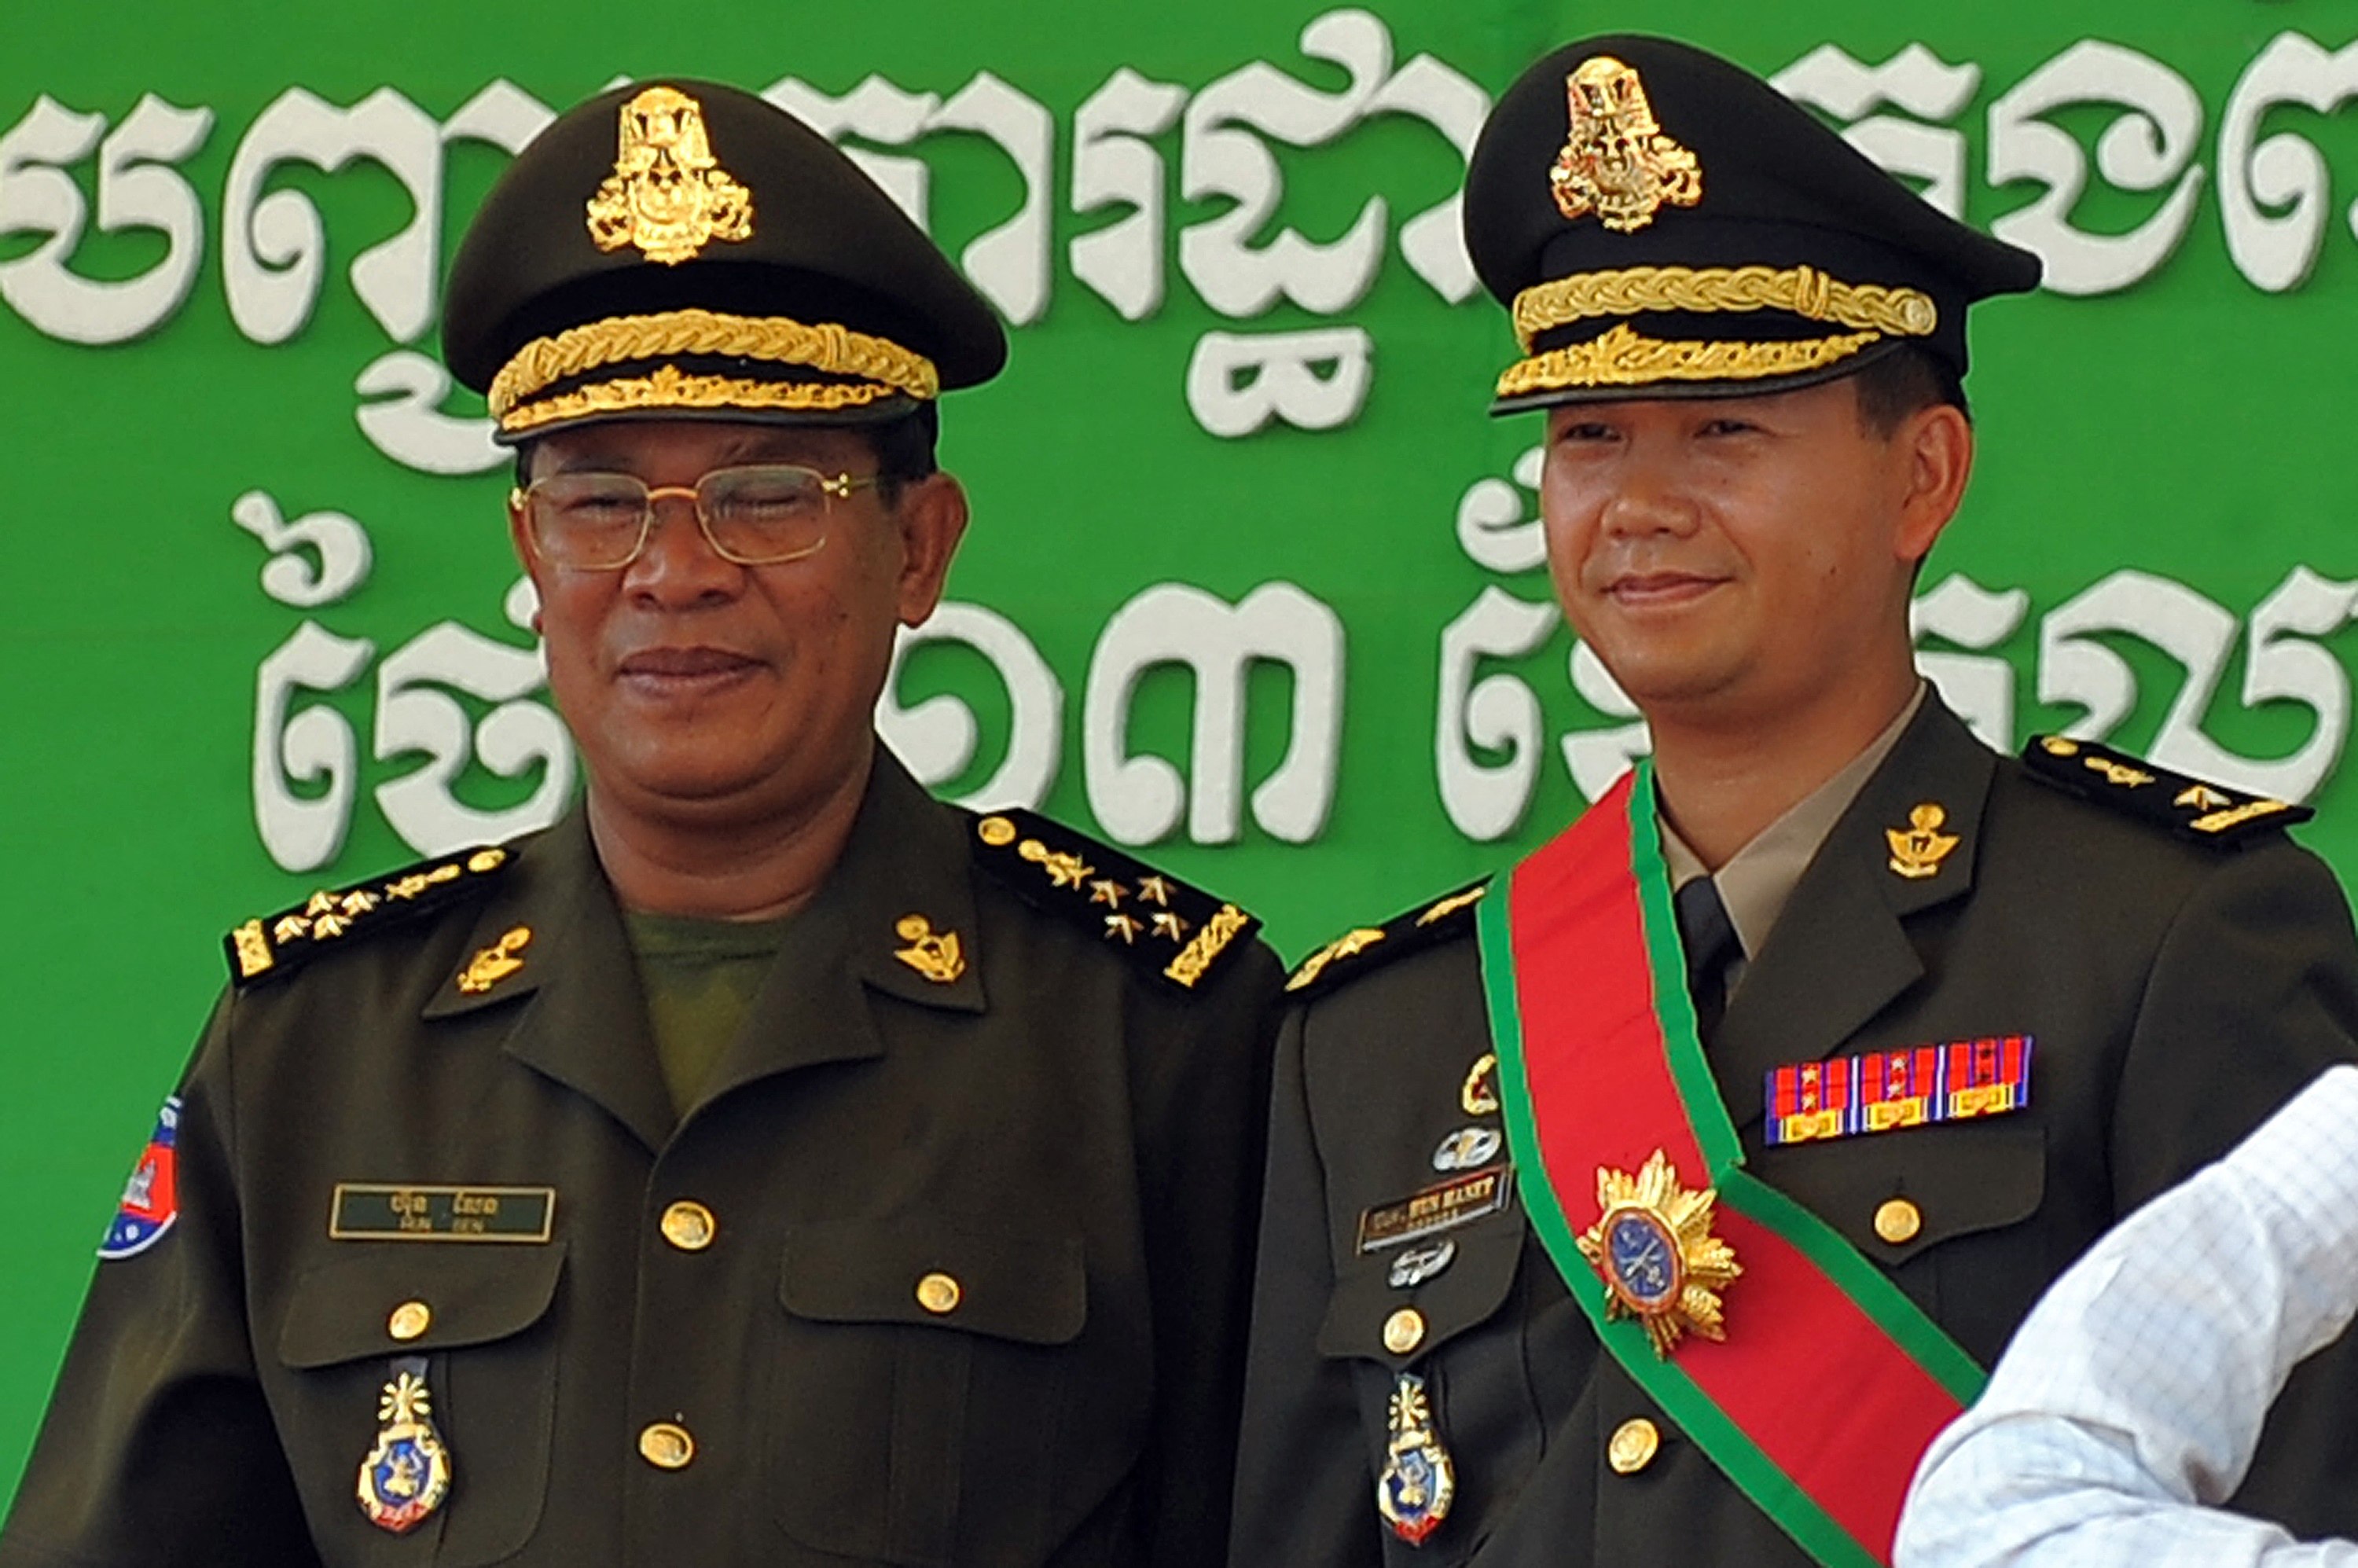 Cambodia’s Prime Minister Hun Sen (left) poses with his son Hun Manet (right) during a ceremony at a military base in Phnom Penh on October 13, 2009. Photo: AFP